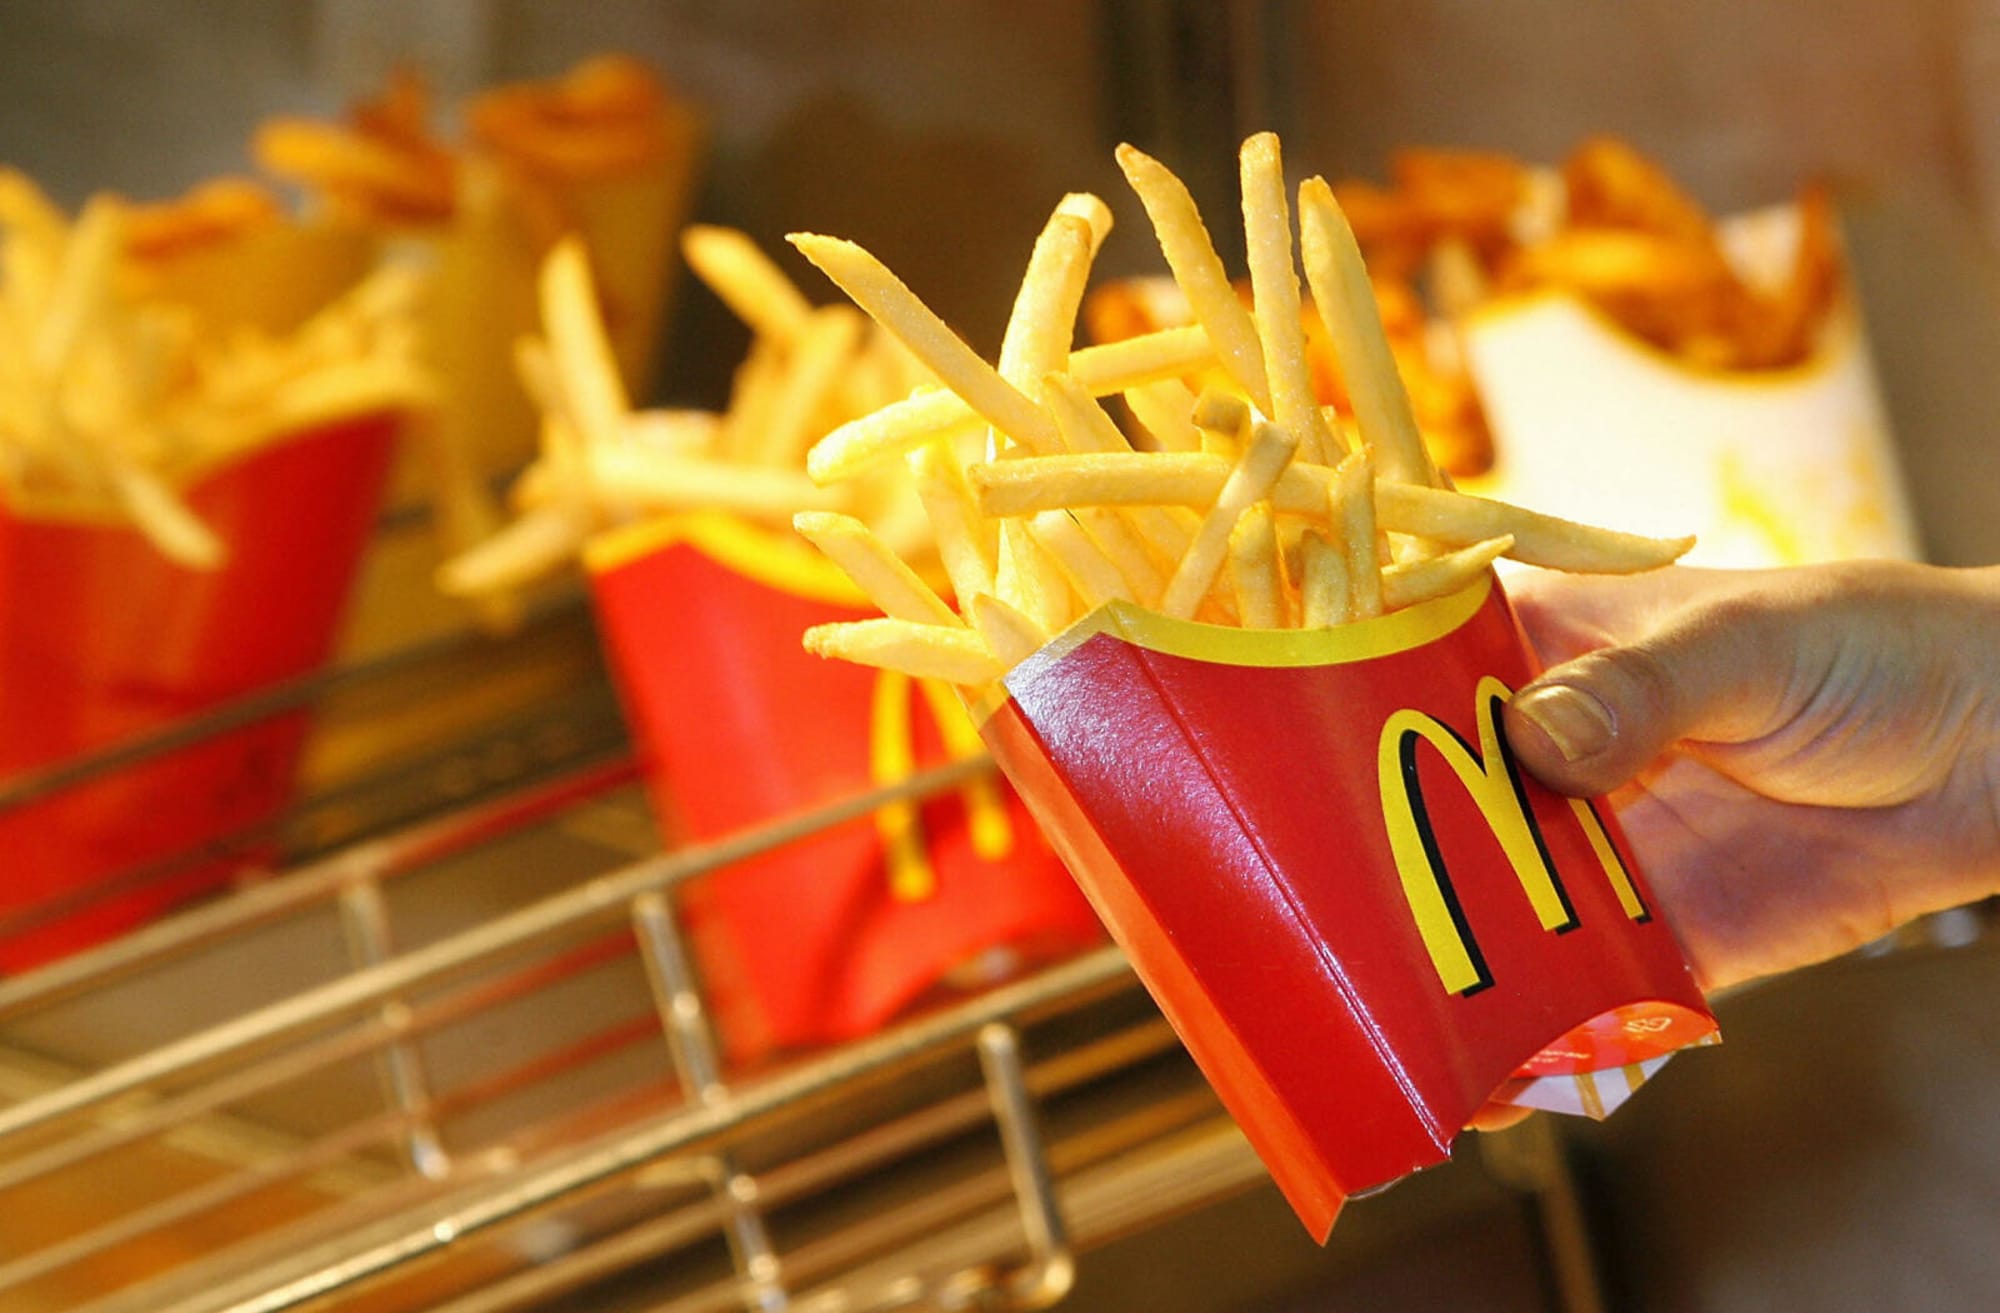 Ranking 21 of the best Fast Food French Fries by Restaurant